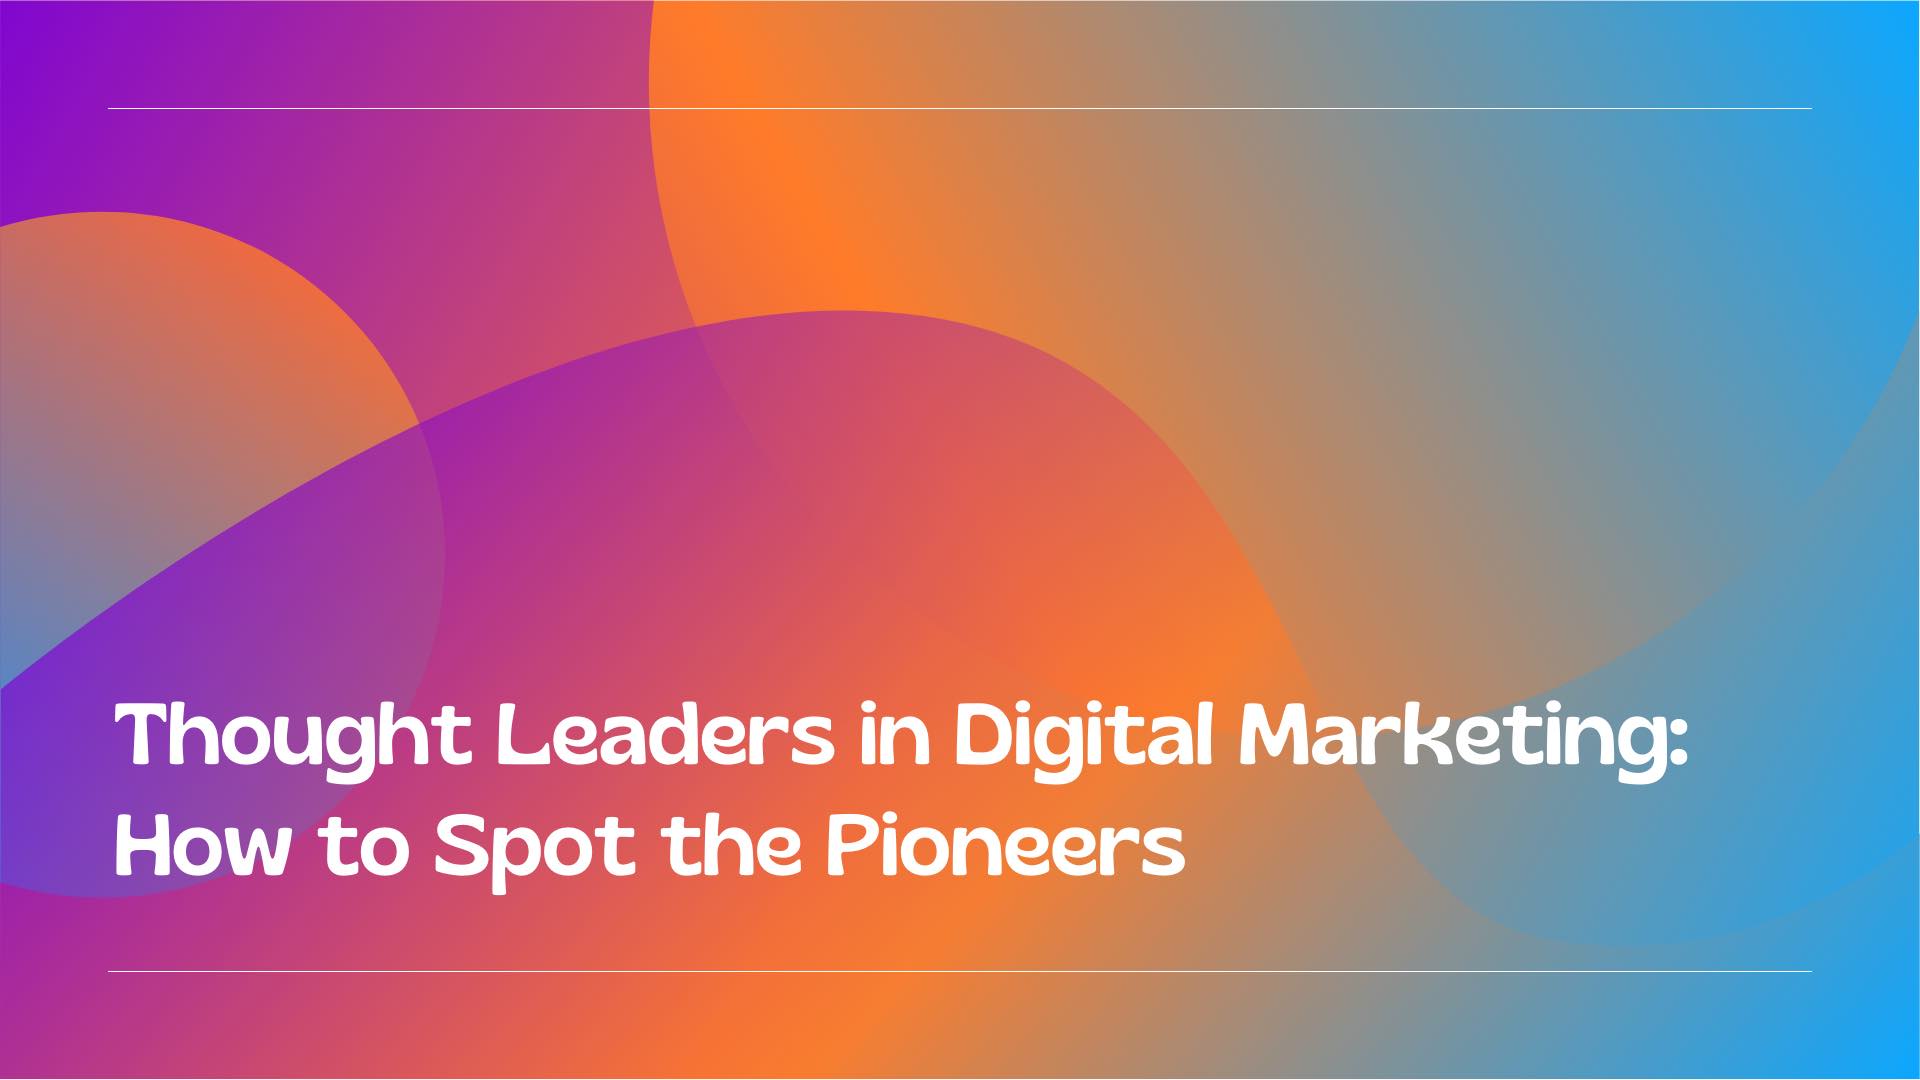 Thought Leaders in Digital Marketing - 7